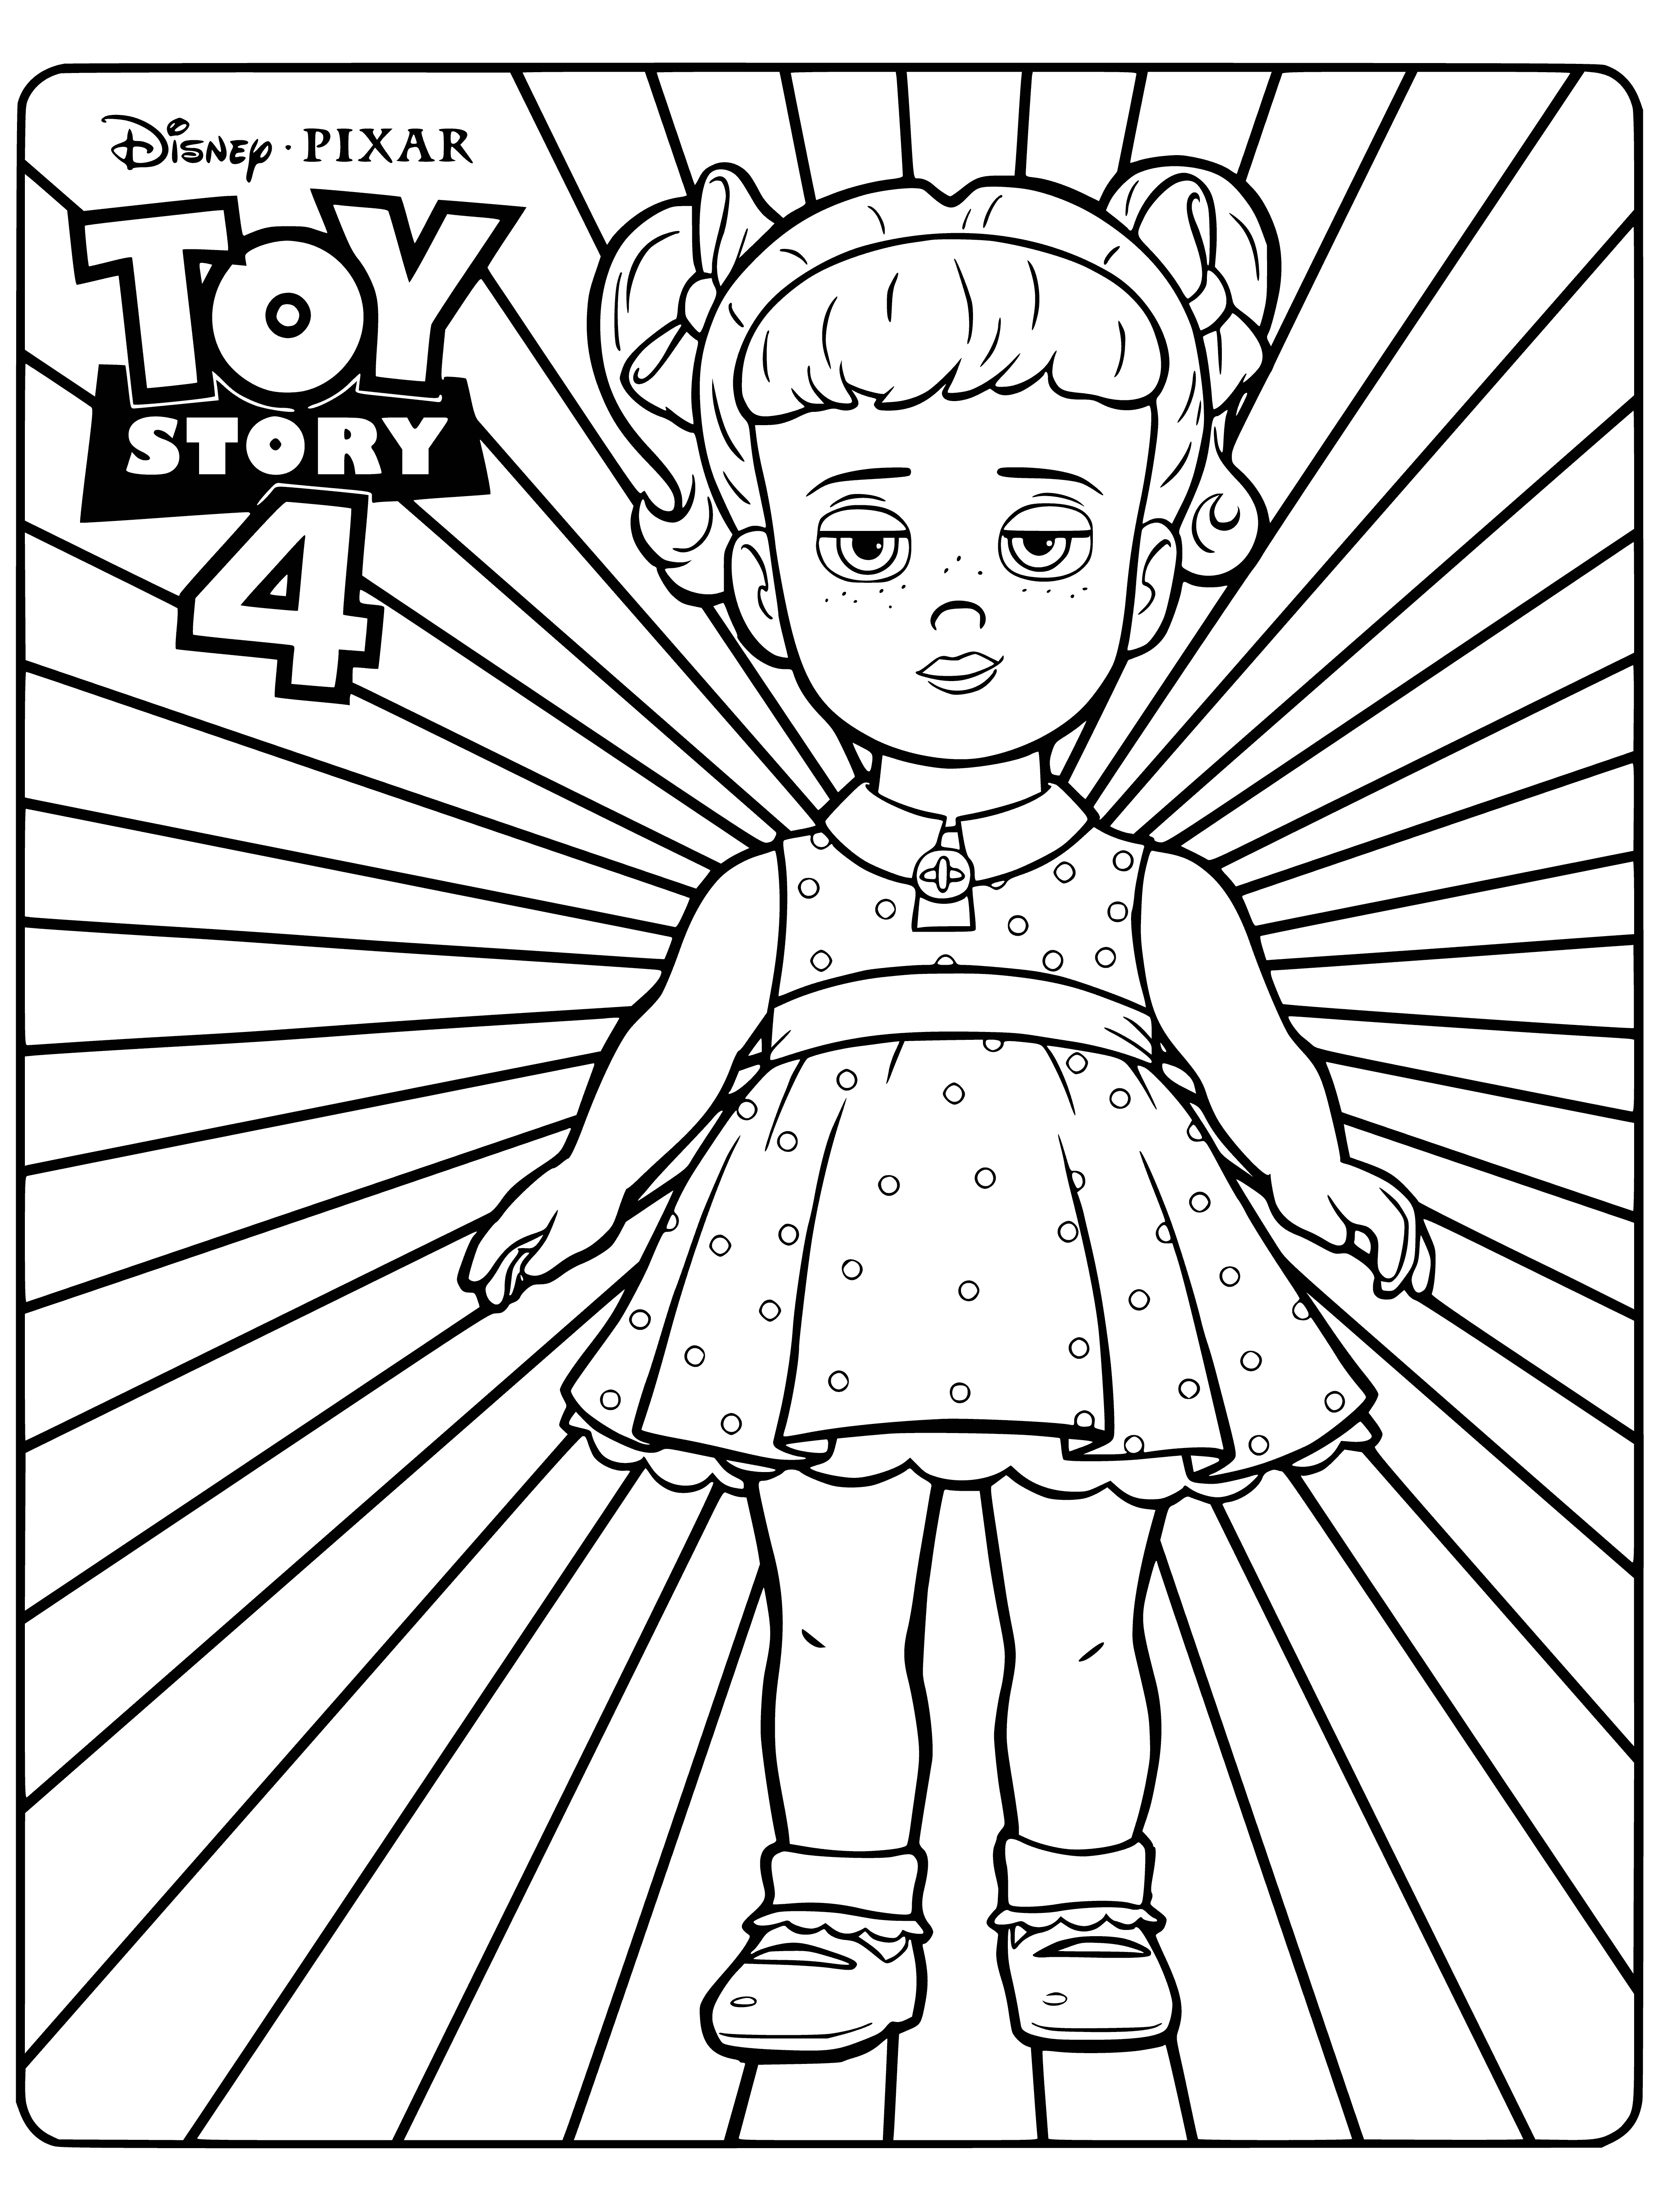 coloring page: Small, brown-haired Gabby Doll has a pink dress, purple shoes, small brown nose, and big blue eyes.